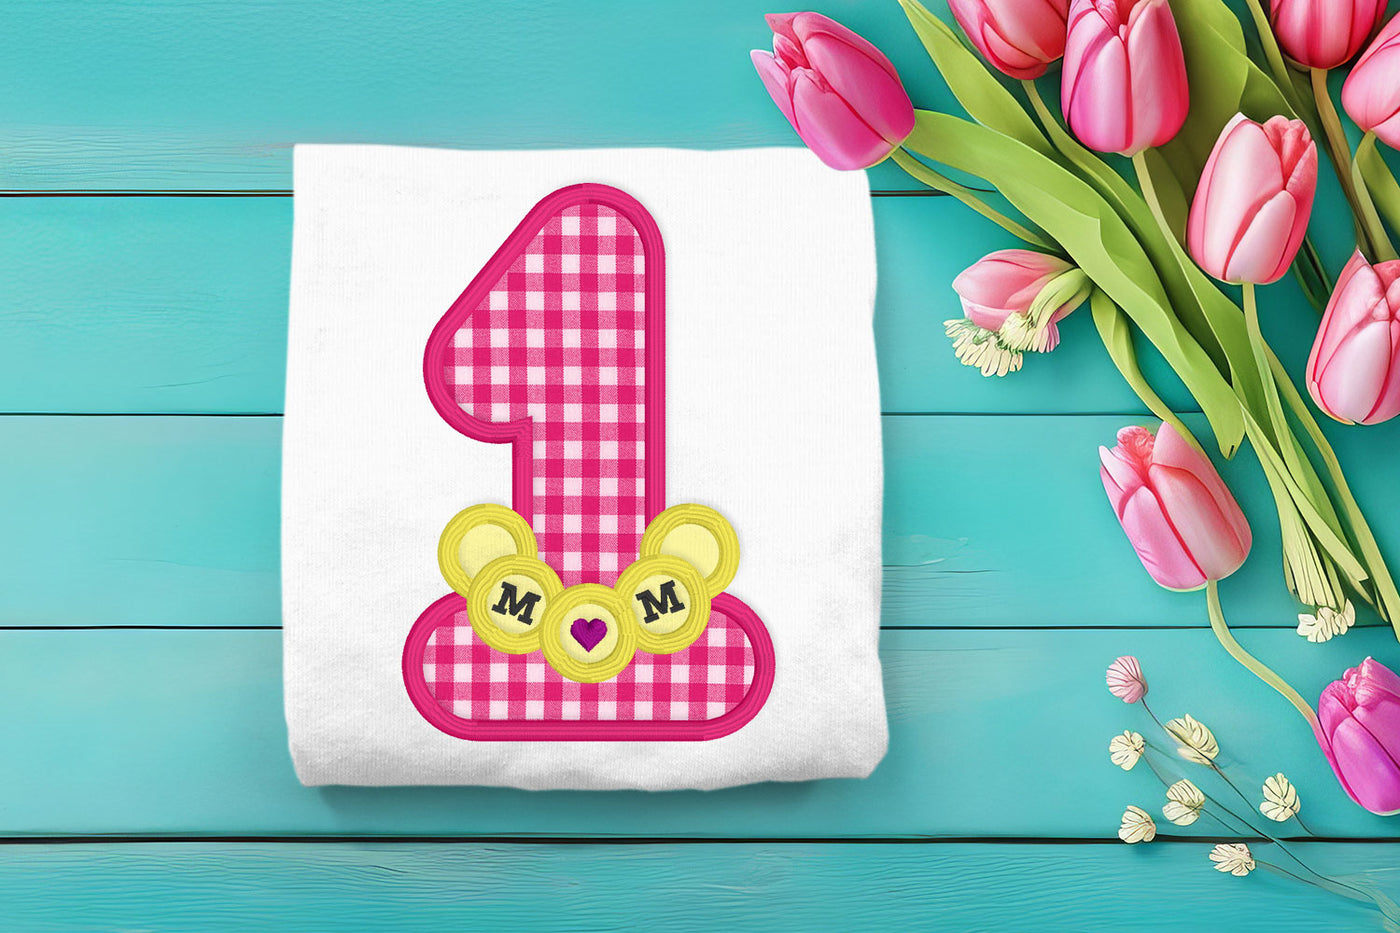 Number 1 Mom or Mum with Necklace Applique Embroidery